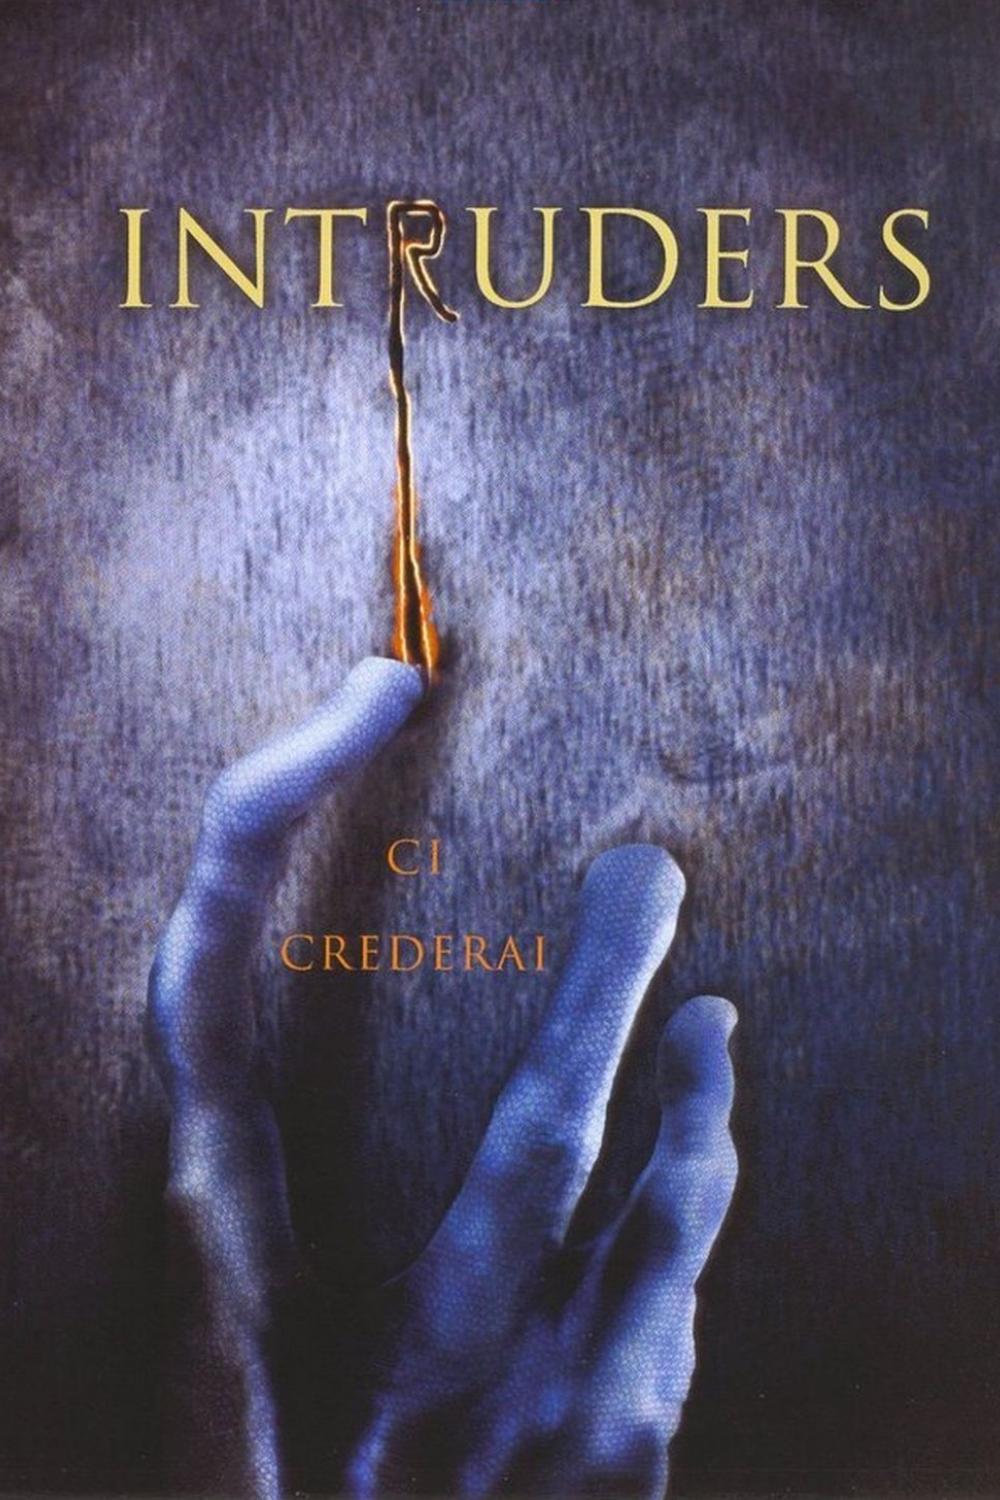 Poster for the movie "Intruders"